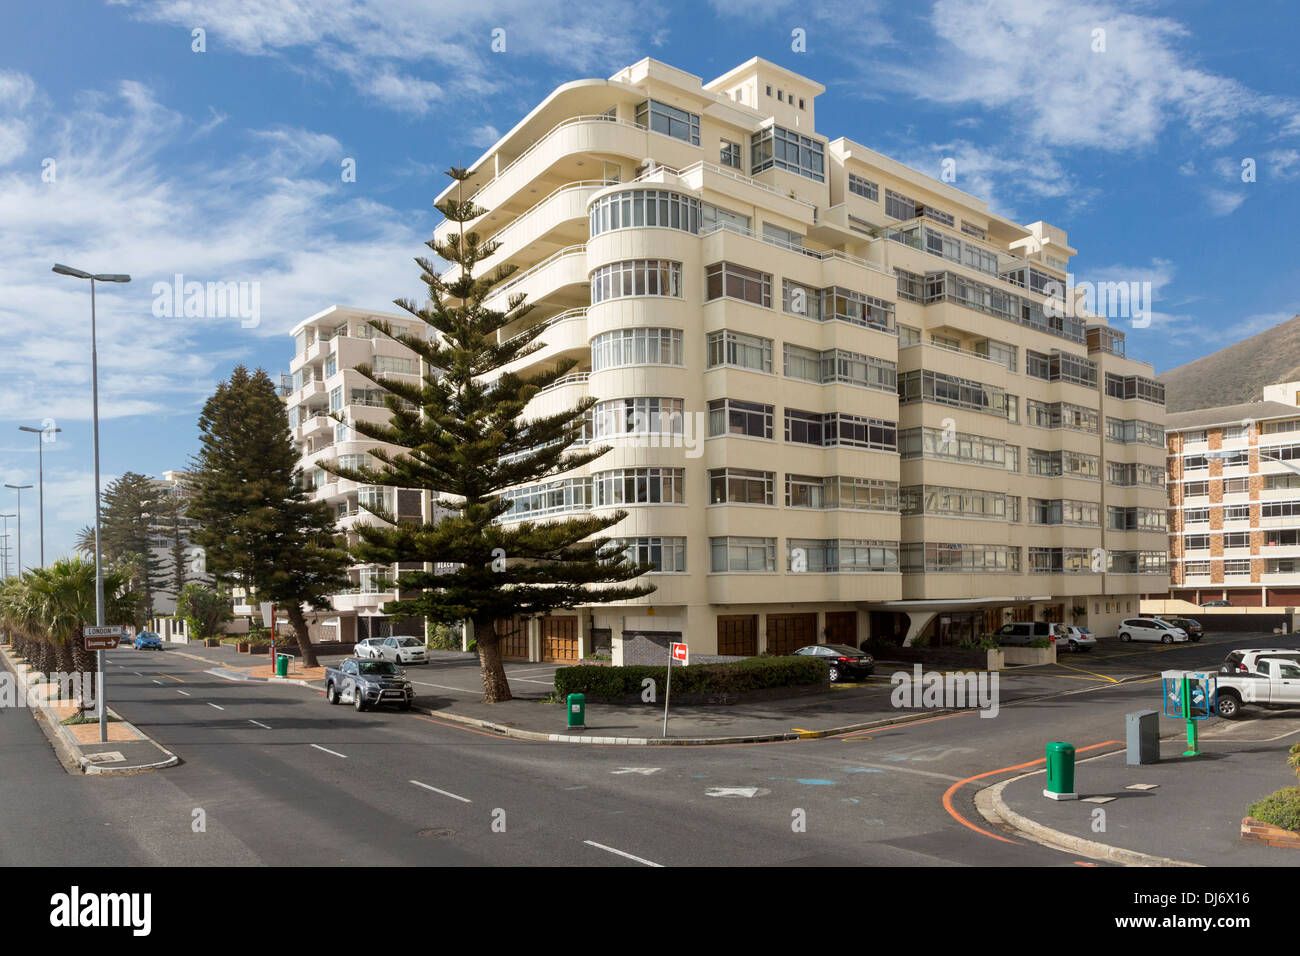 South Africa, Cape Town, Sea Point. Apartment Buildings. Stock Photo